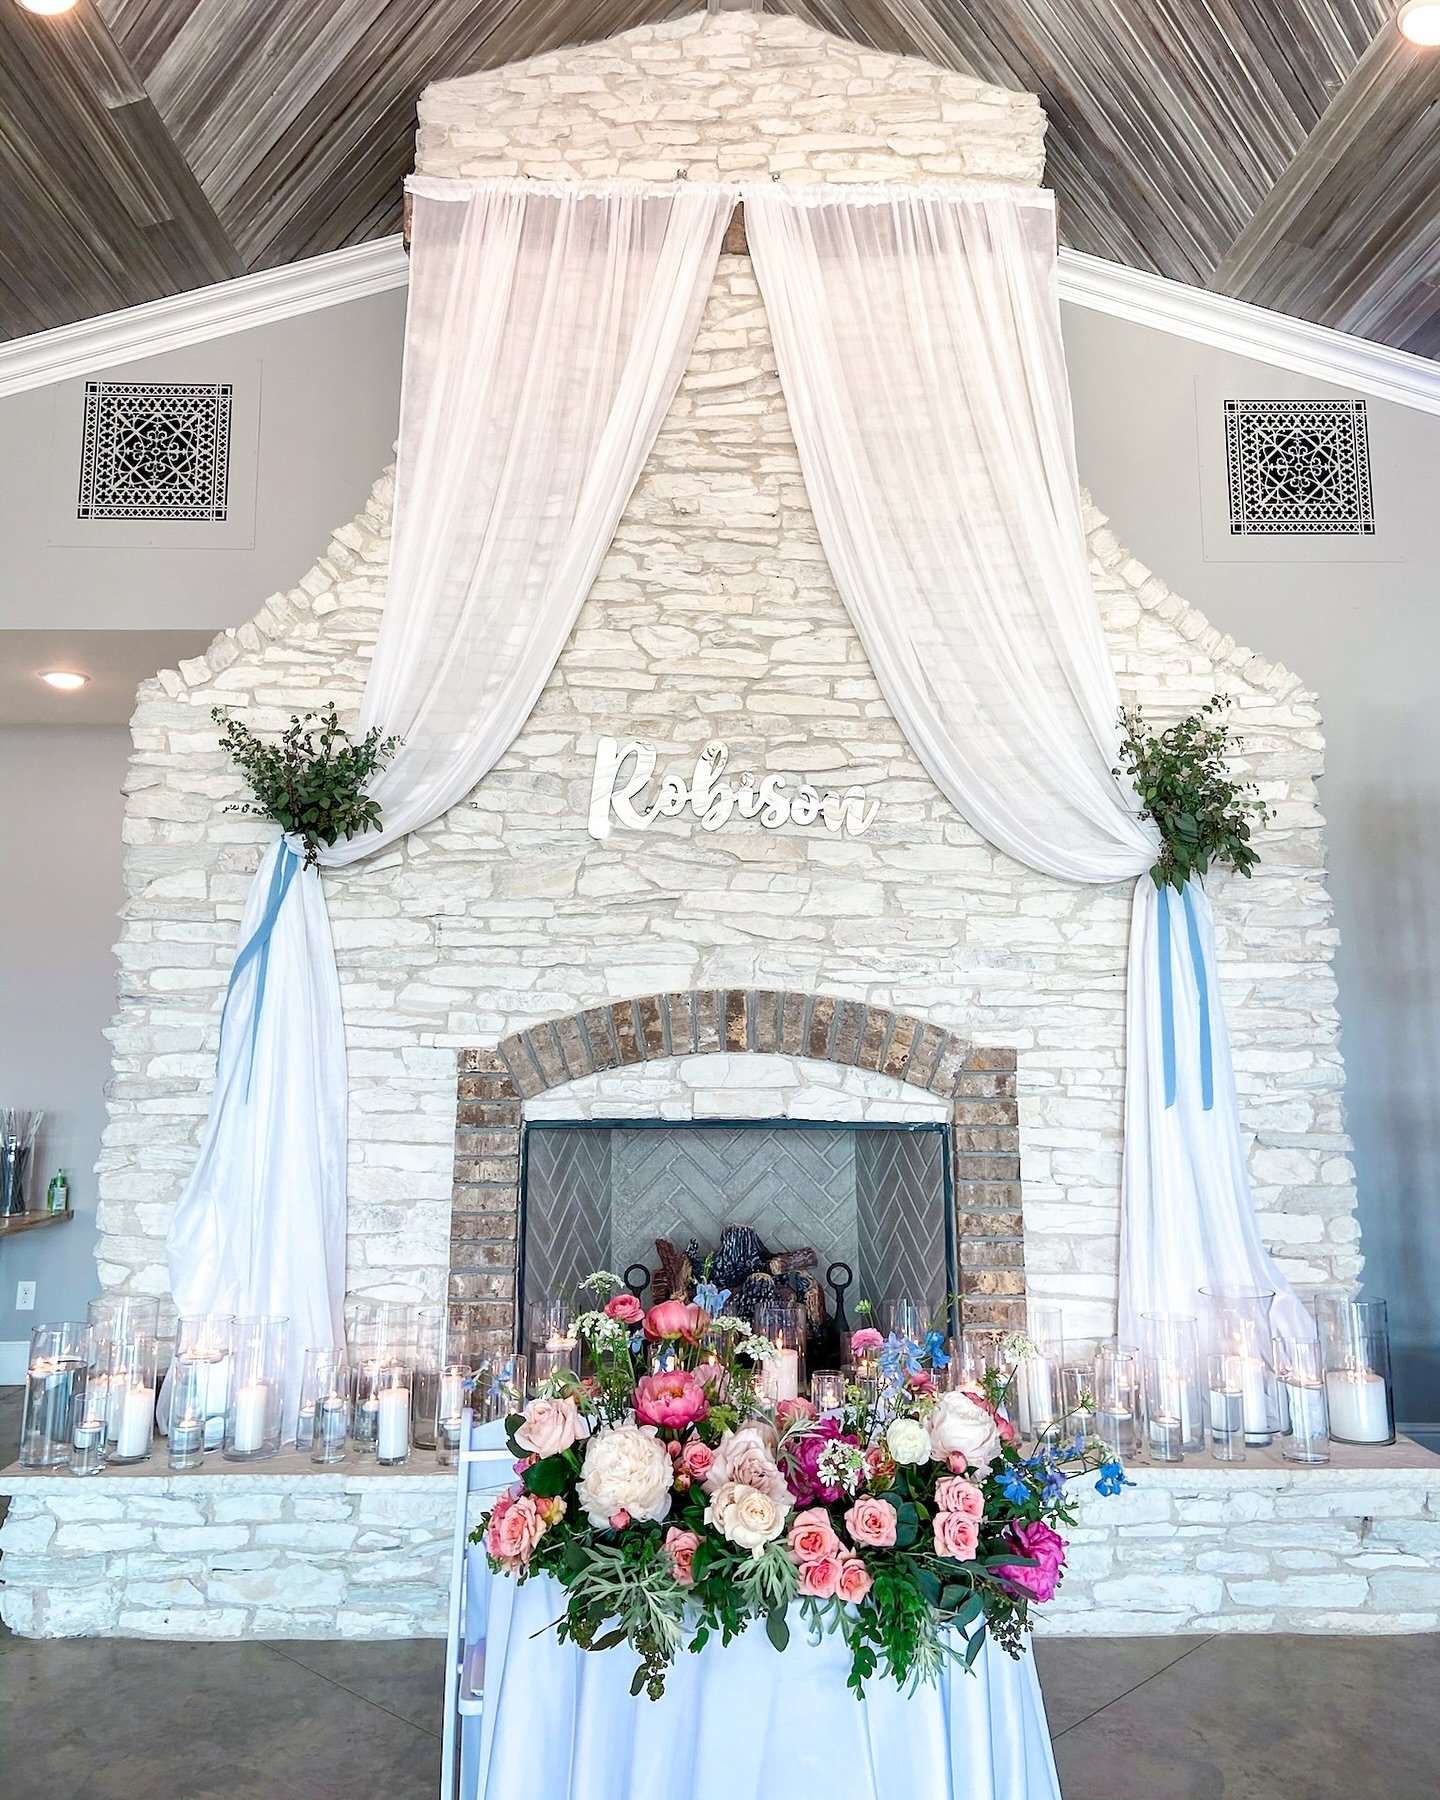 We love seeing how creative our brides get with their decor!